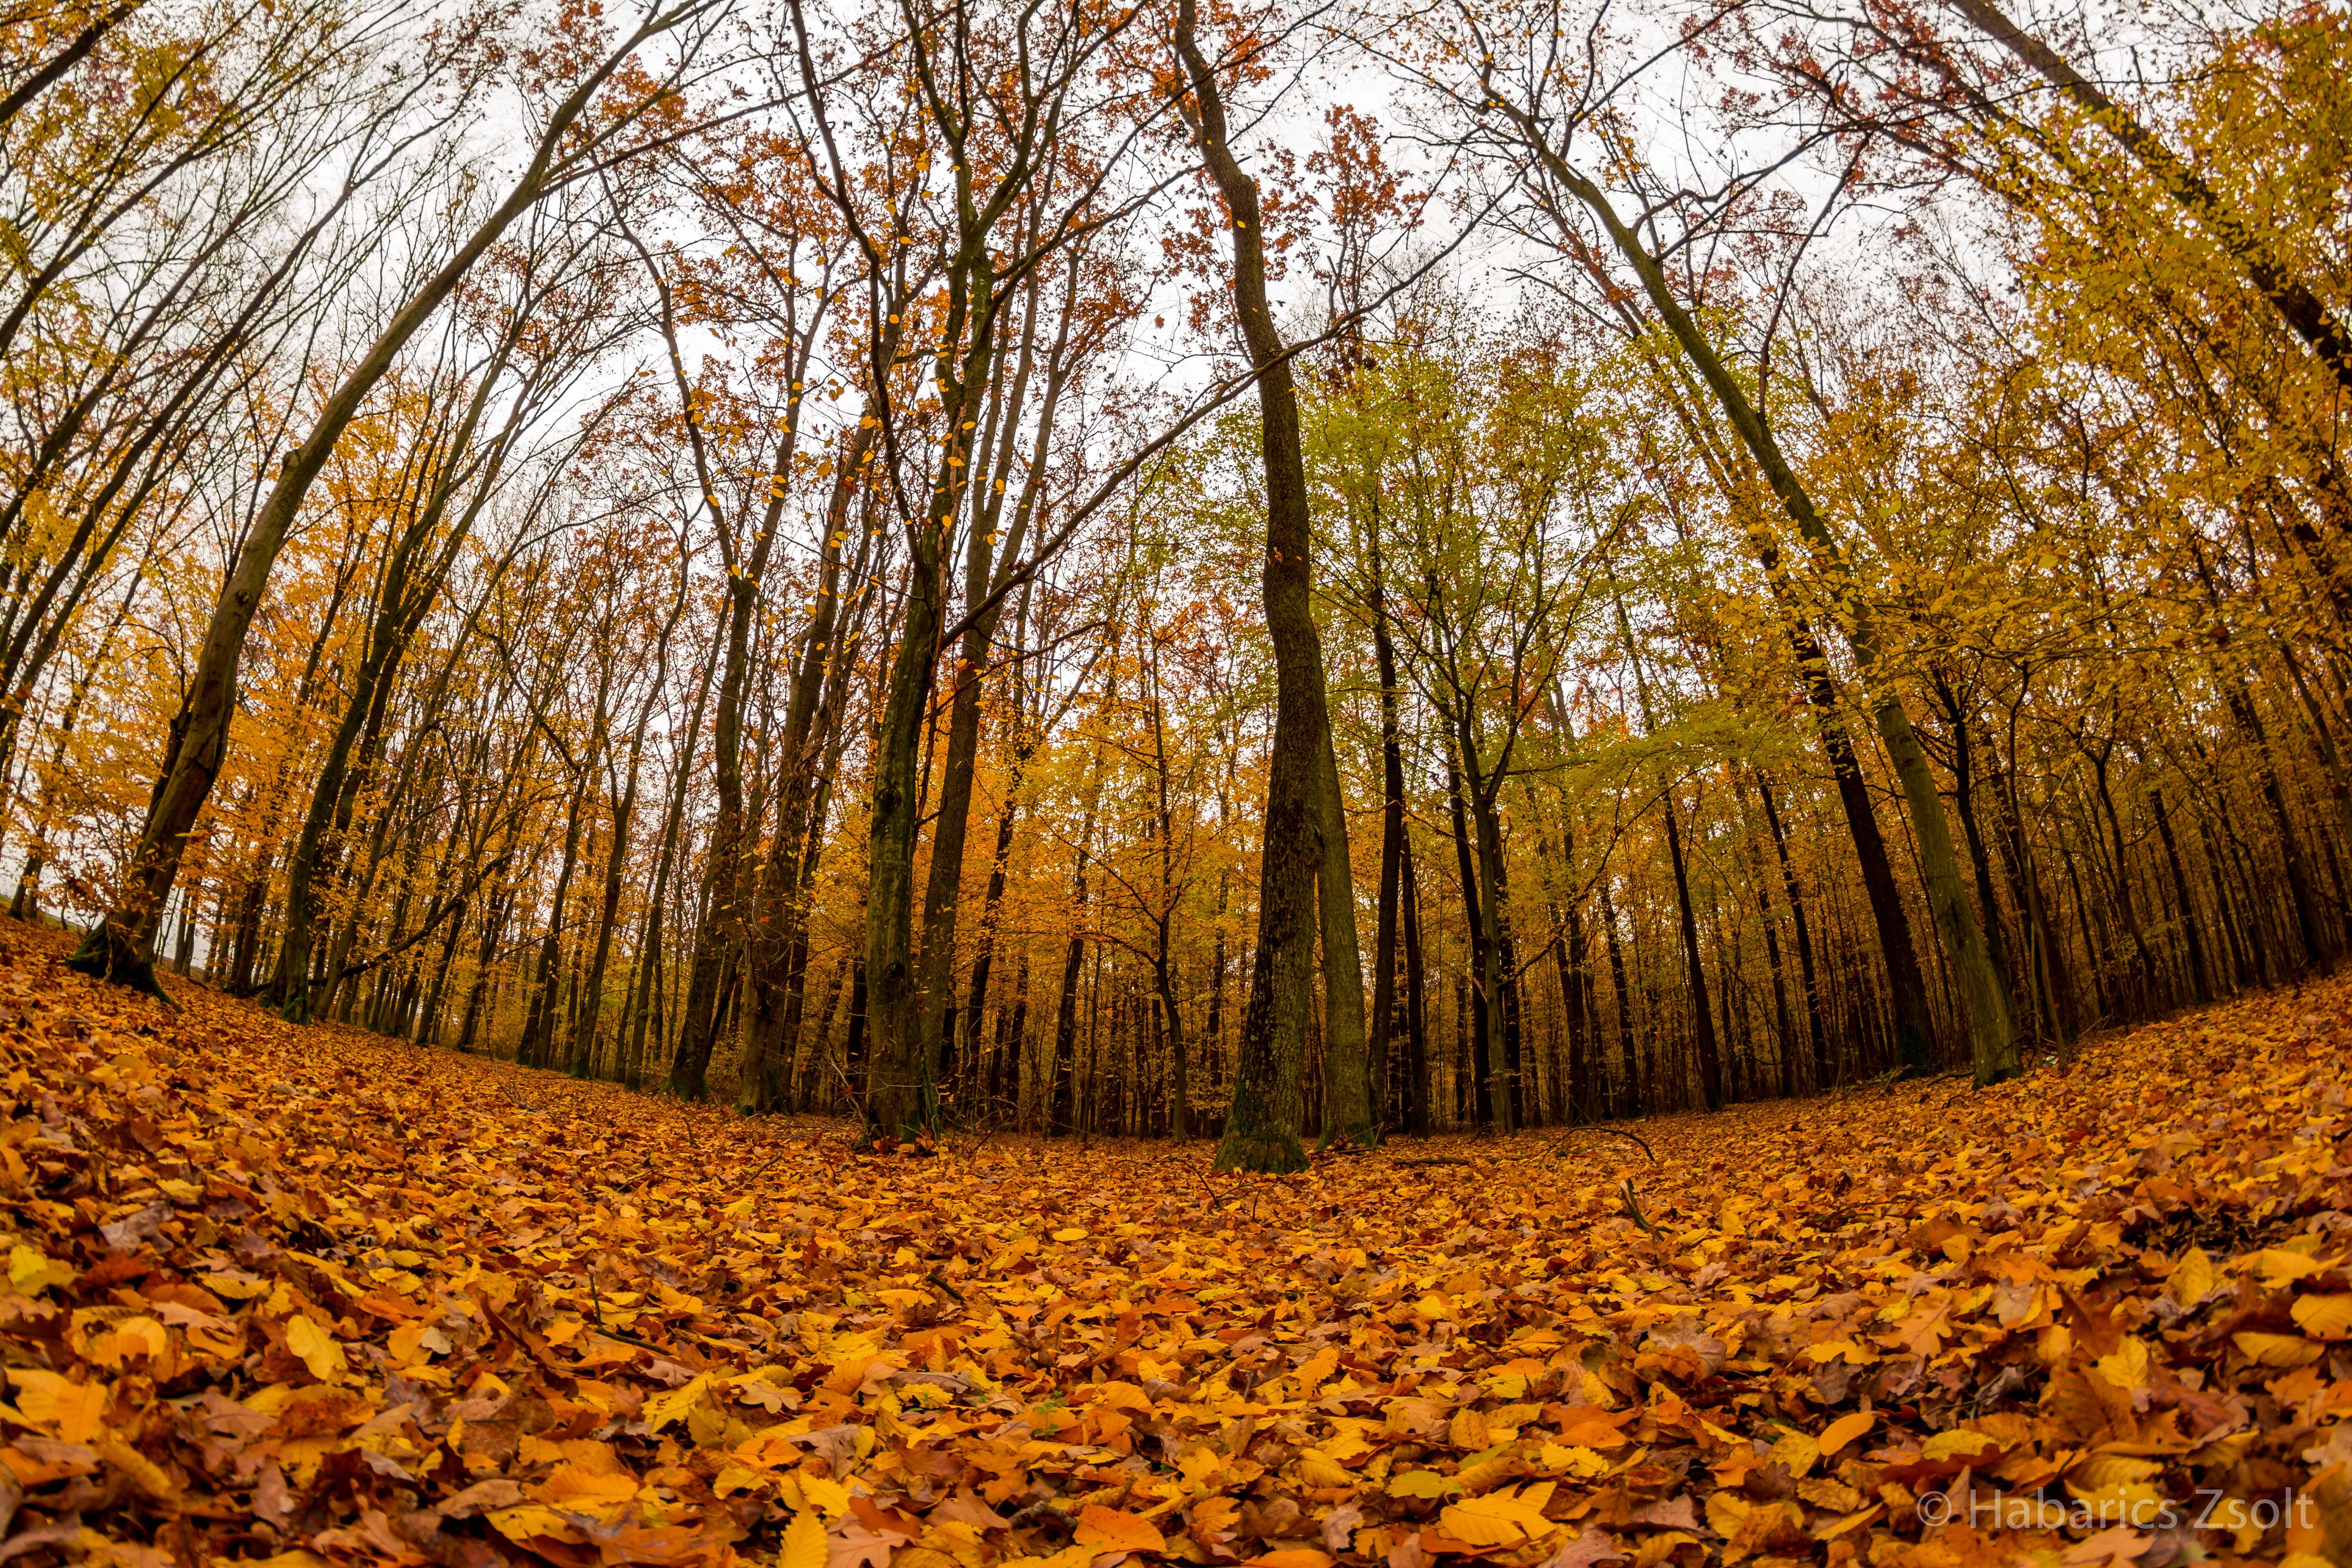 General 6000x4000 forest trees leaves plants fall fallen leaves